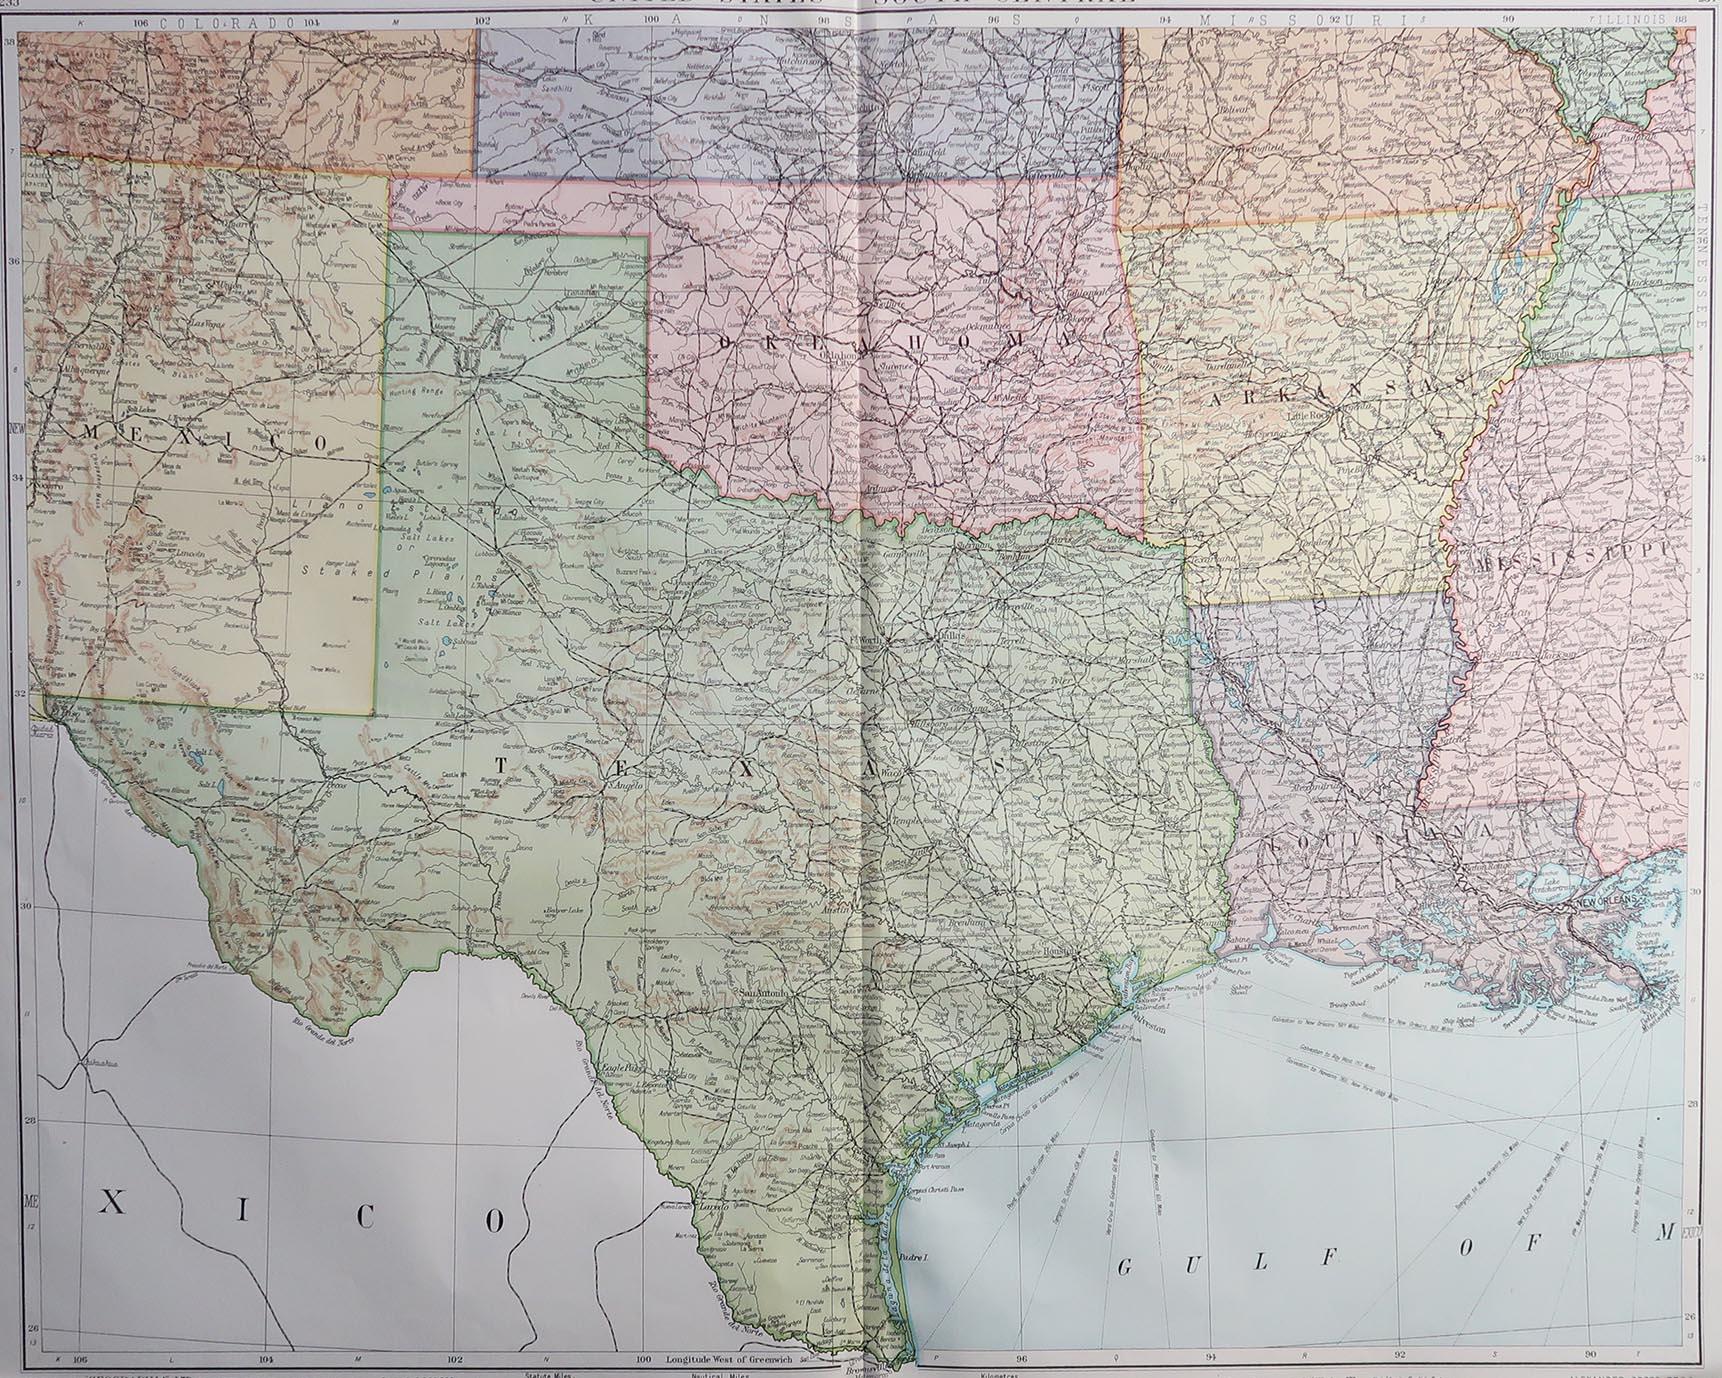 Great map of Texas and adjacent States

Original color.

Good condition 

Published by Alexander Gross

Unframed.








